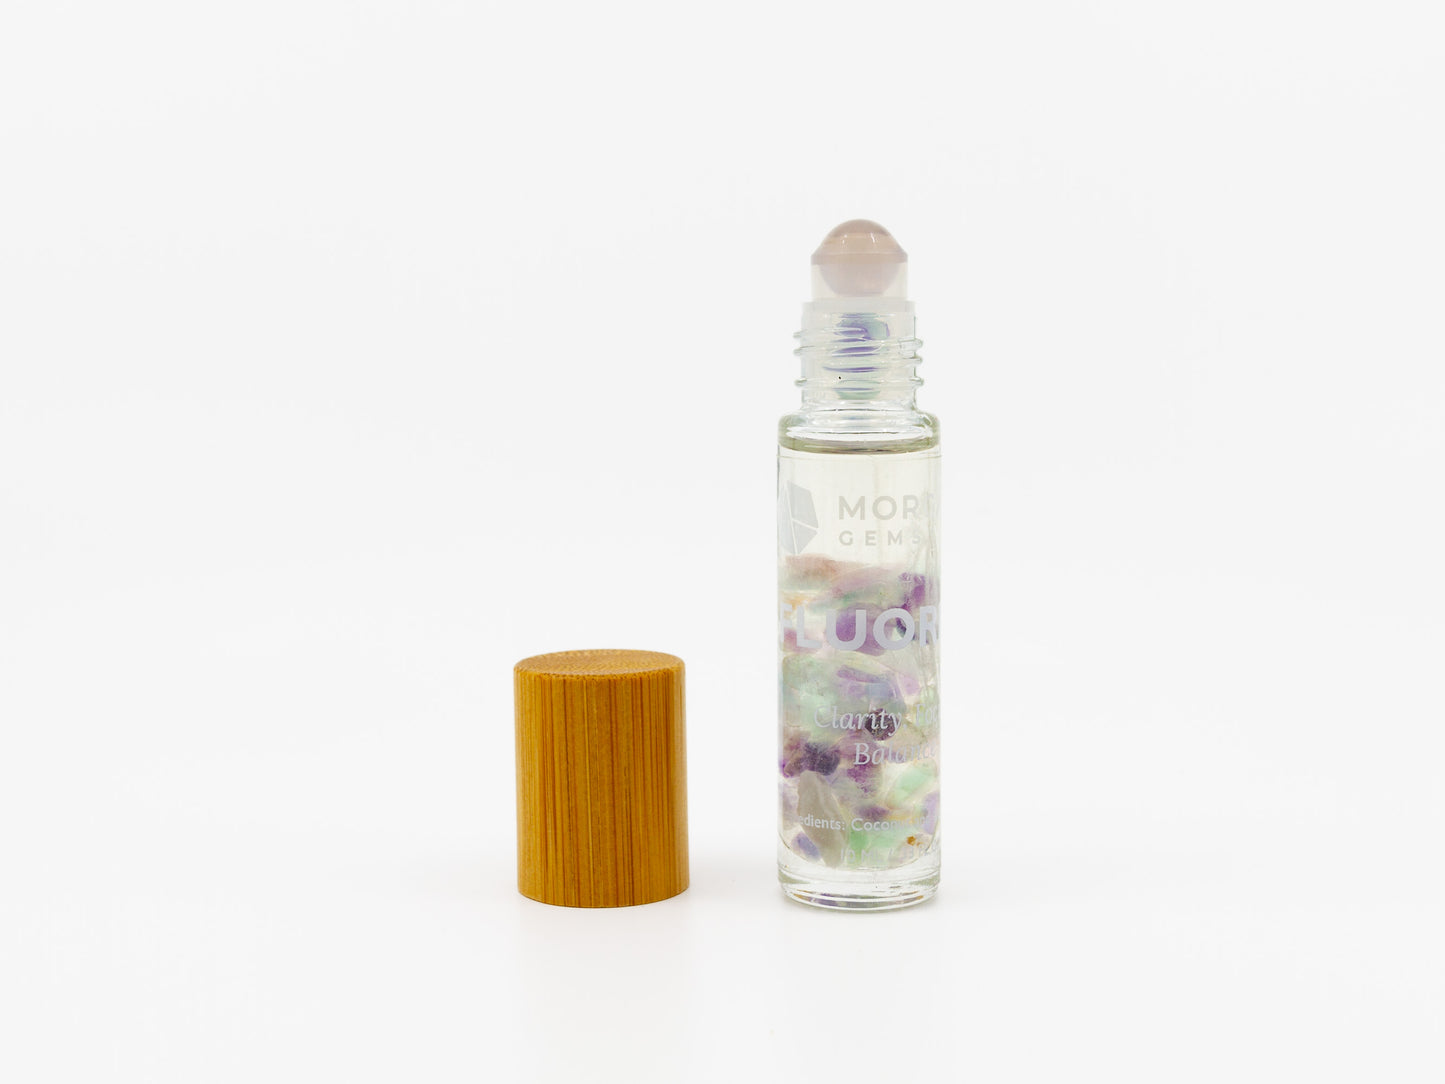 Crystal Infused Roll On Essential Oil Blend